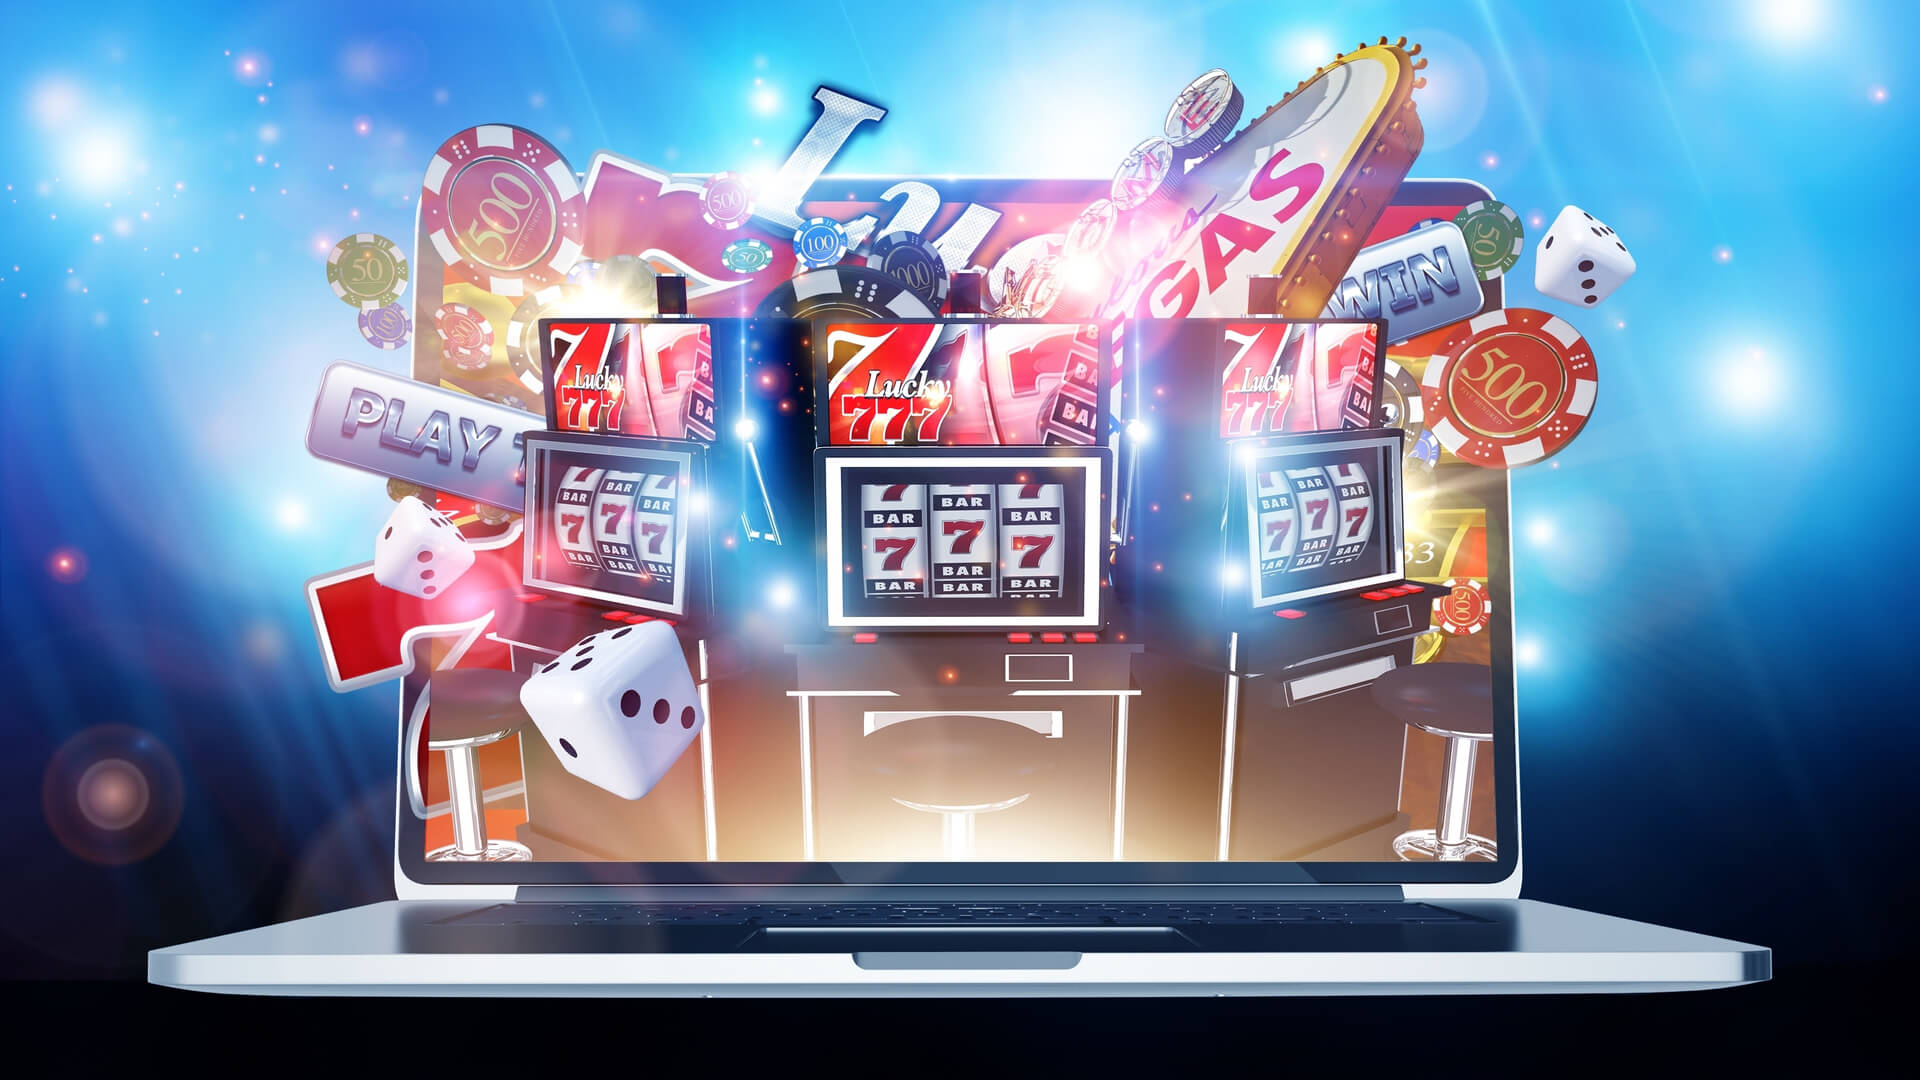 Bwo99 Online Slots: The Path to Casino Riches